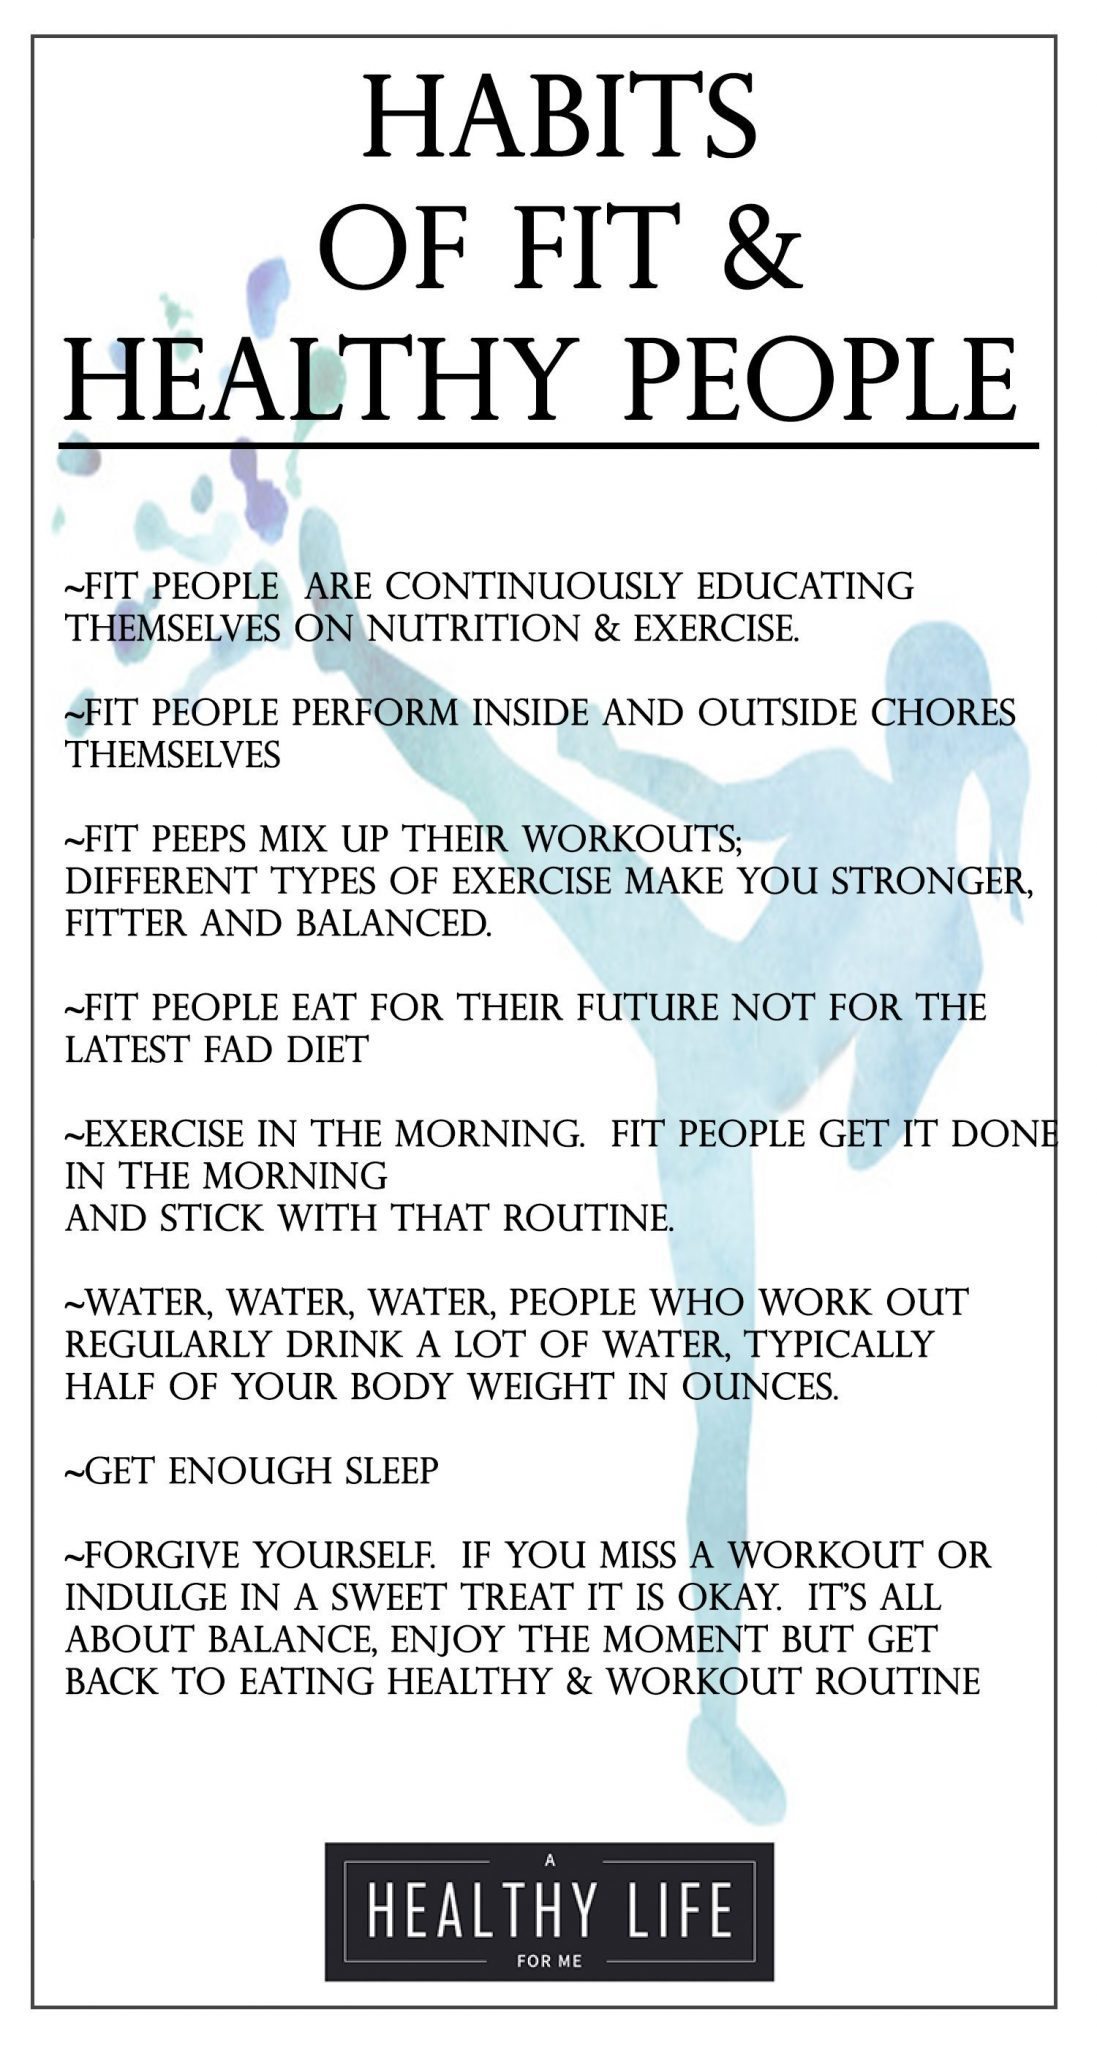 Habits of Fit and Healthy People | ahealthylifeforme.com